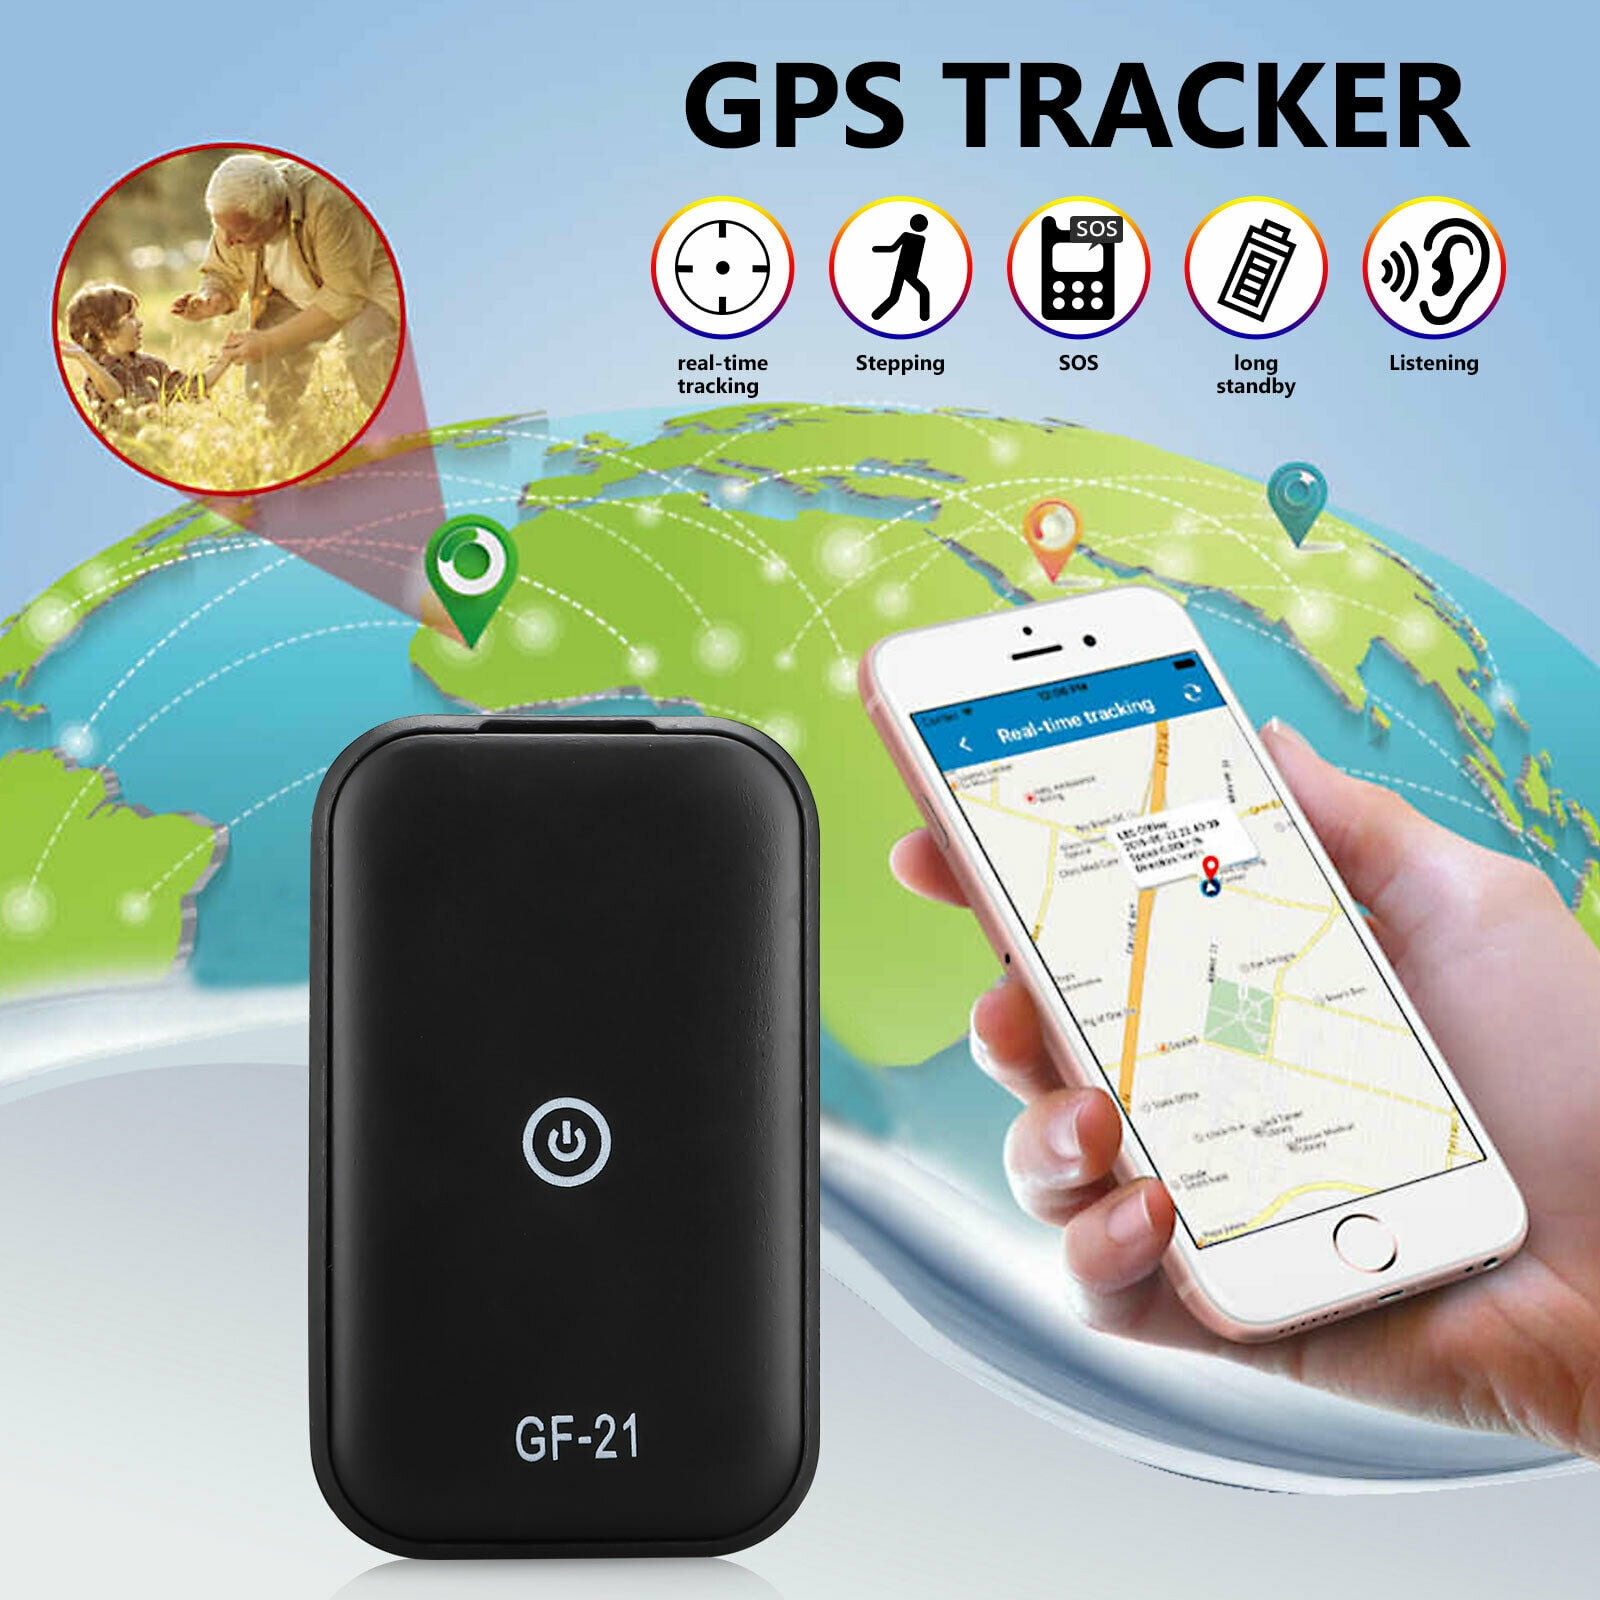 GPS Tracker Vehicle, Car, Truck, RV, Equipment, Mini Hidden Device for Kids and Use with Smartphone and Track Target's Real-Time Location - Walmart.com